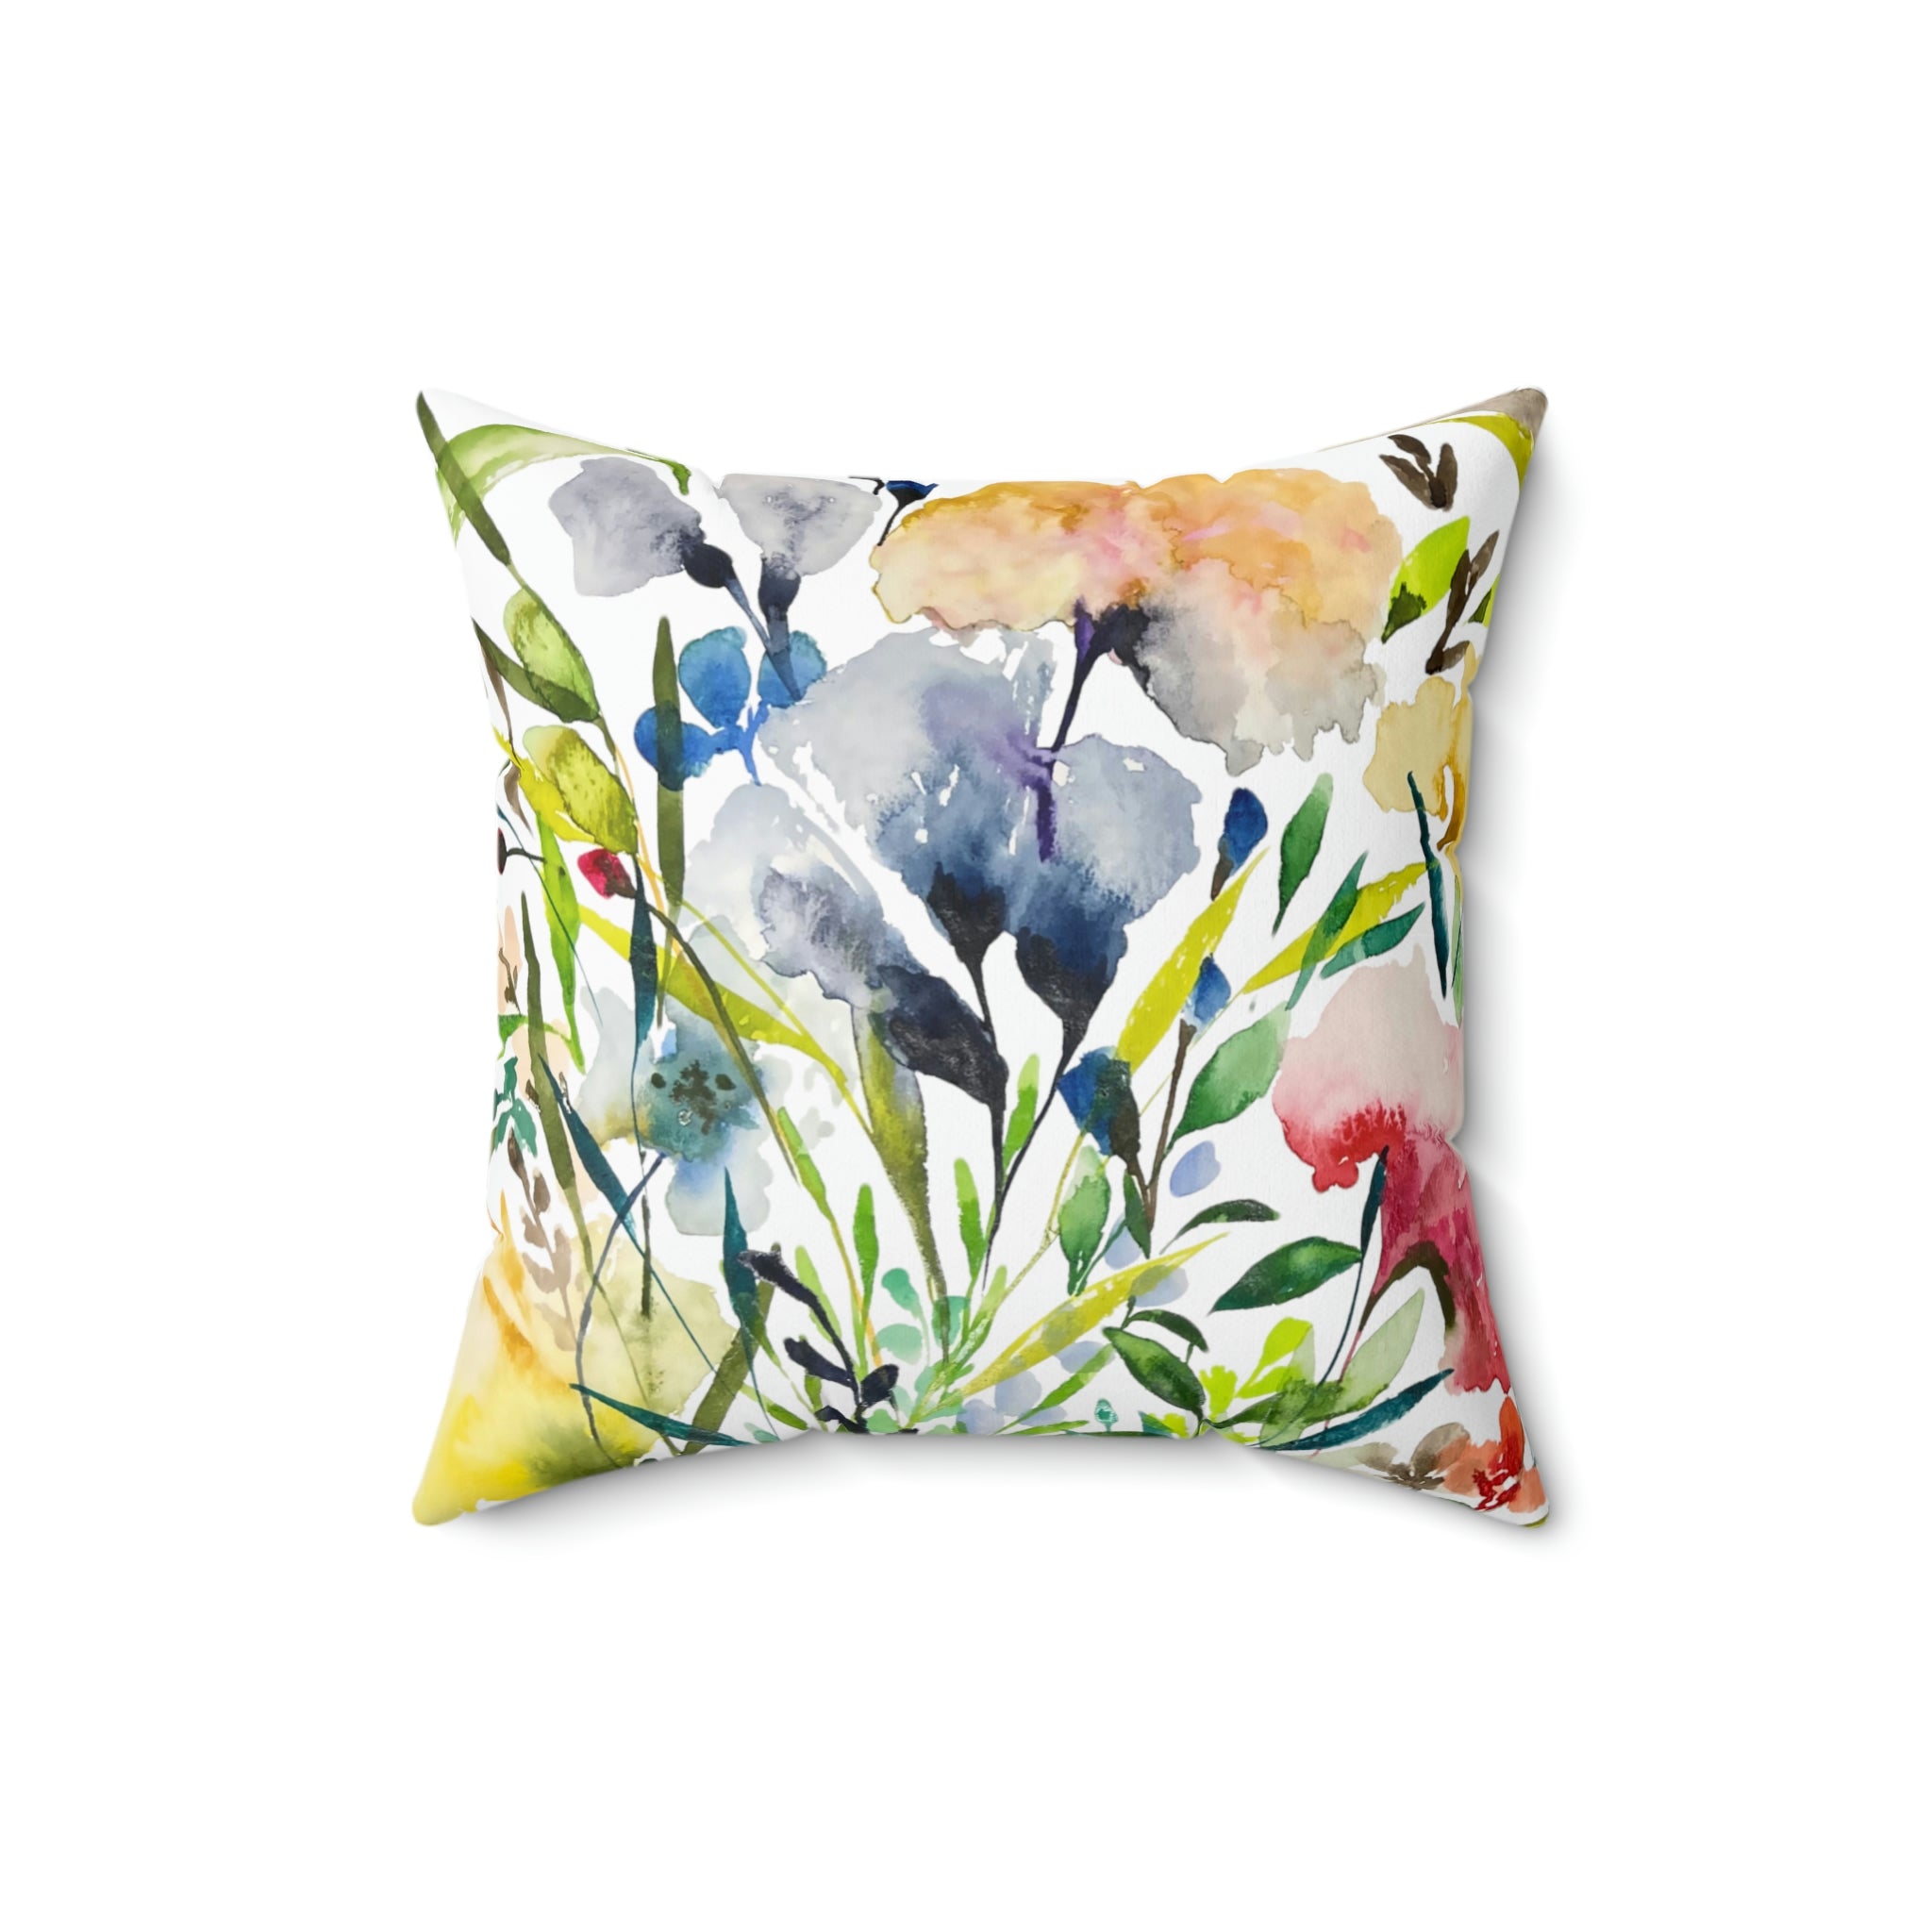 Flowers #4 Botanical Print on Throw Pillow Cover